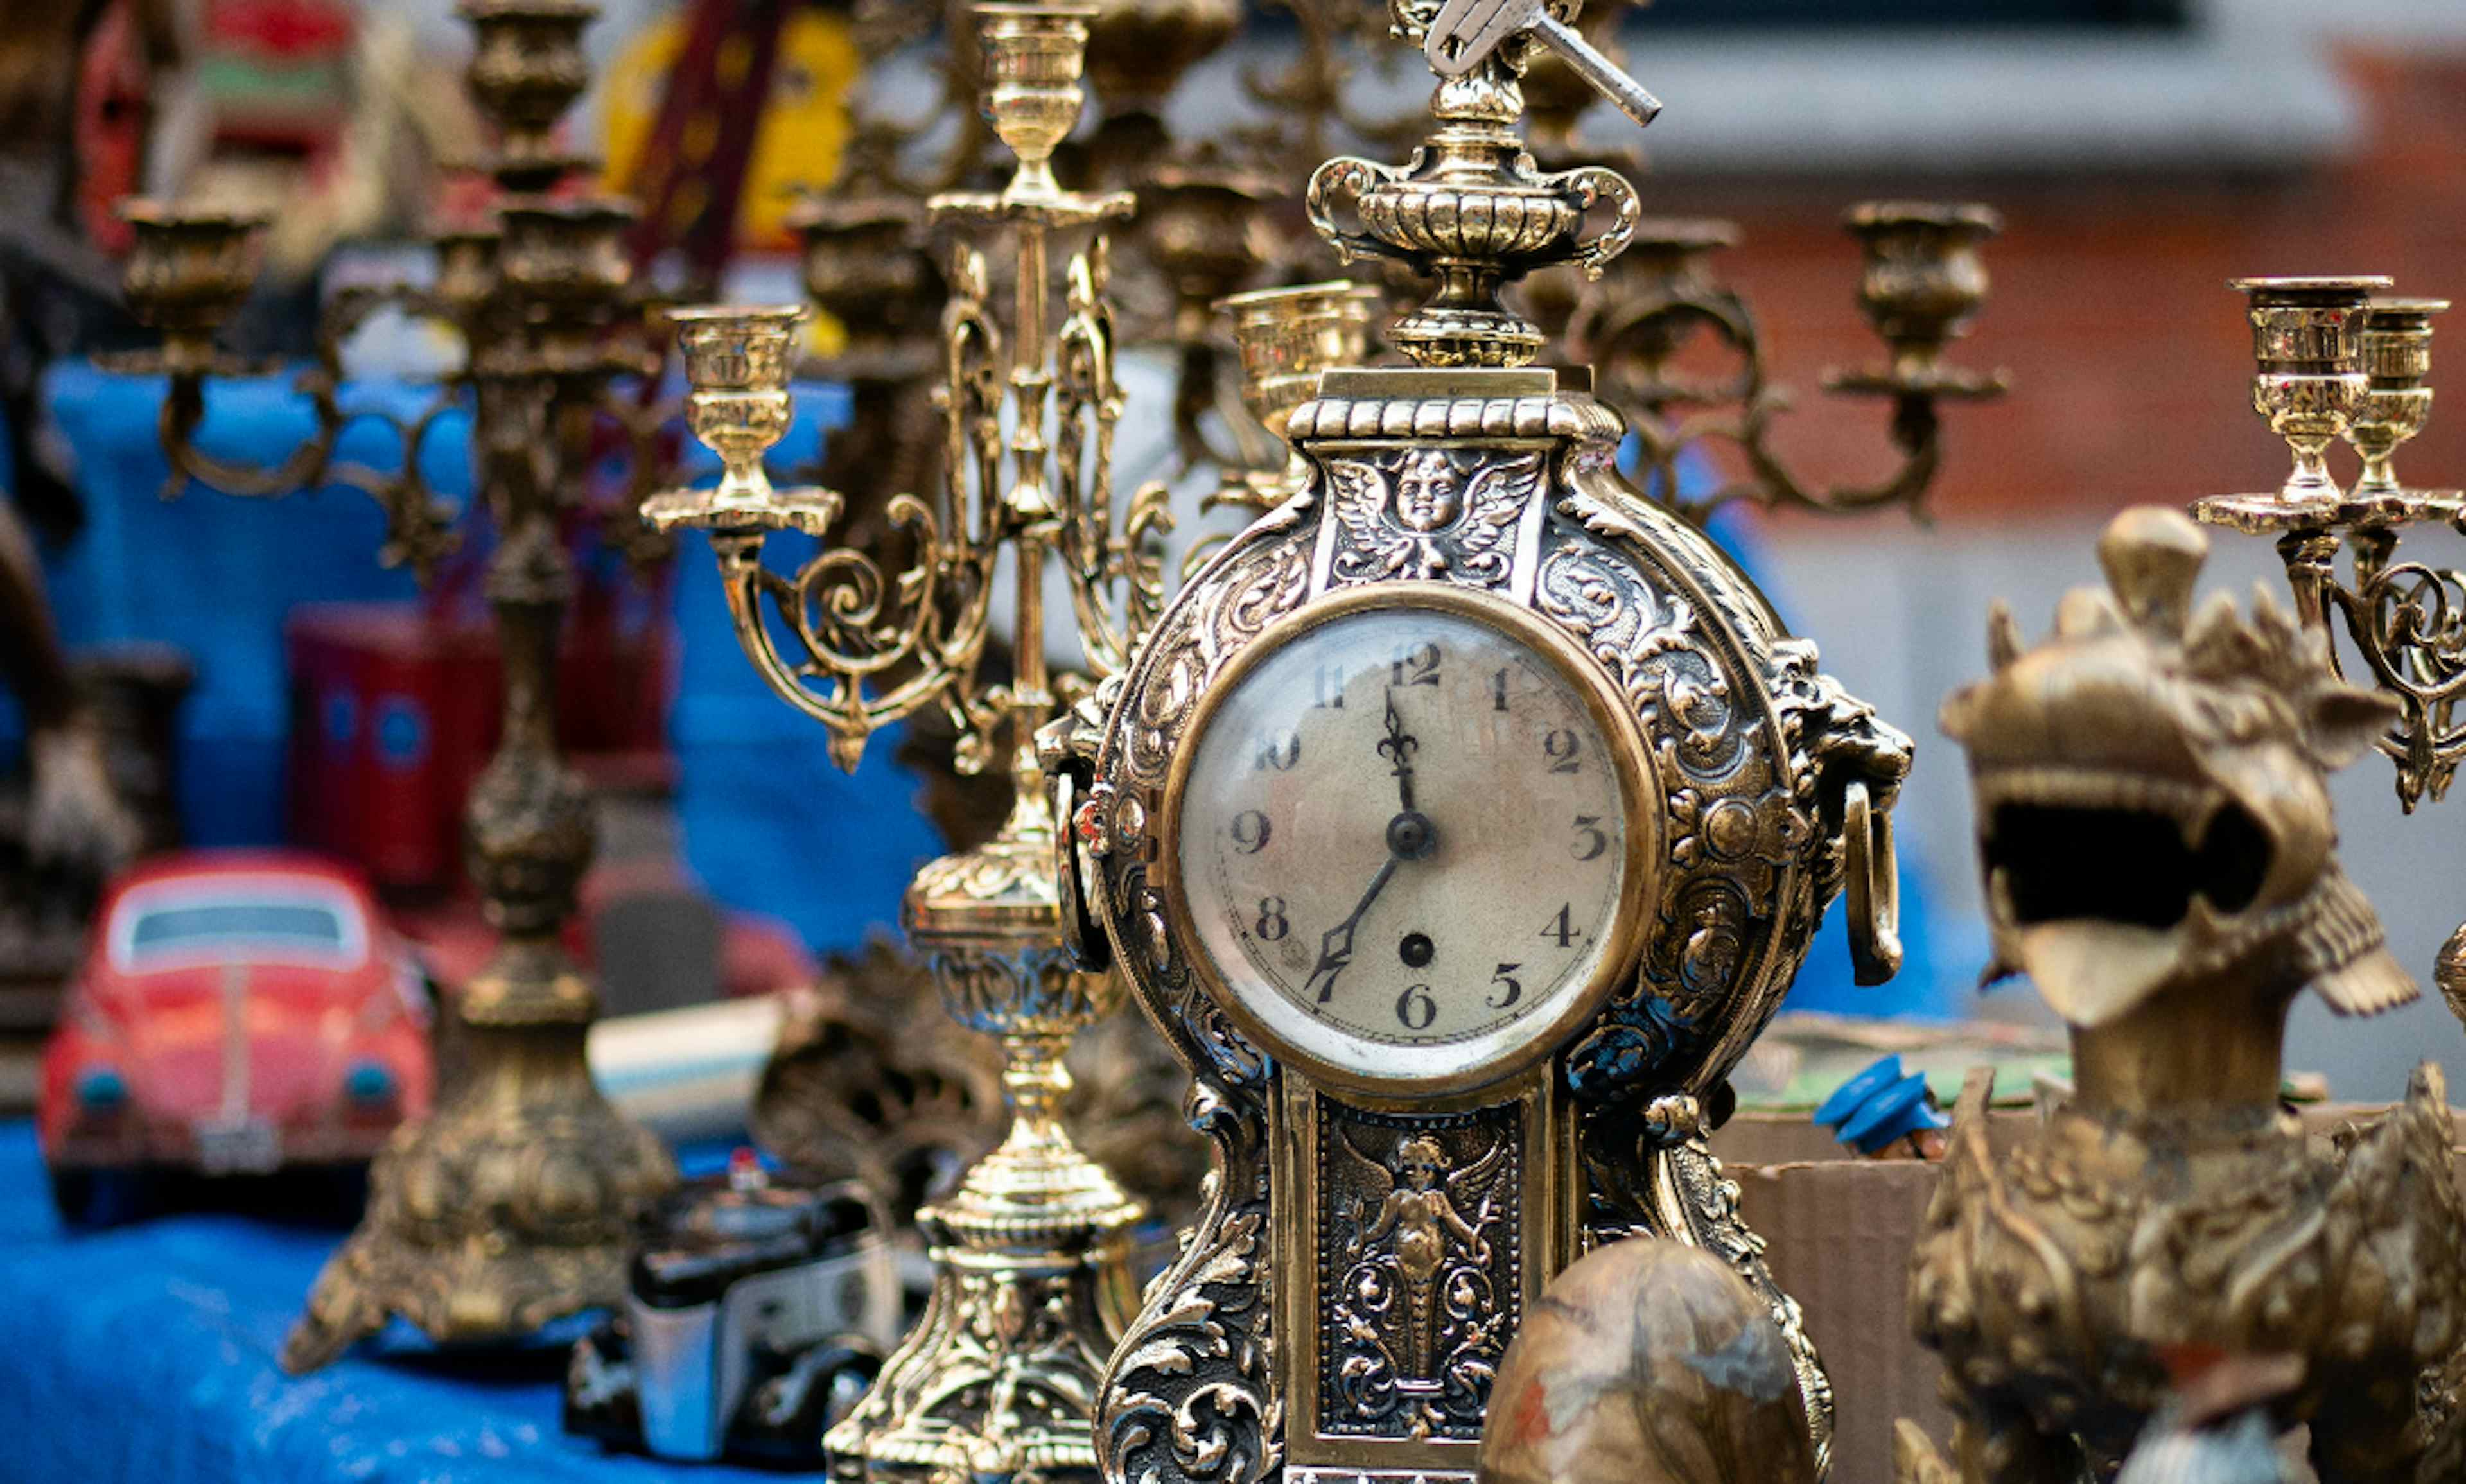 Beautiful brass and golden vintage desktop clocks offered at Vintage Market Days of Blackfoot of the Yellowstone Teton Territory. 